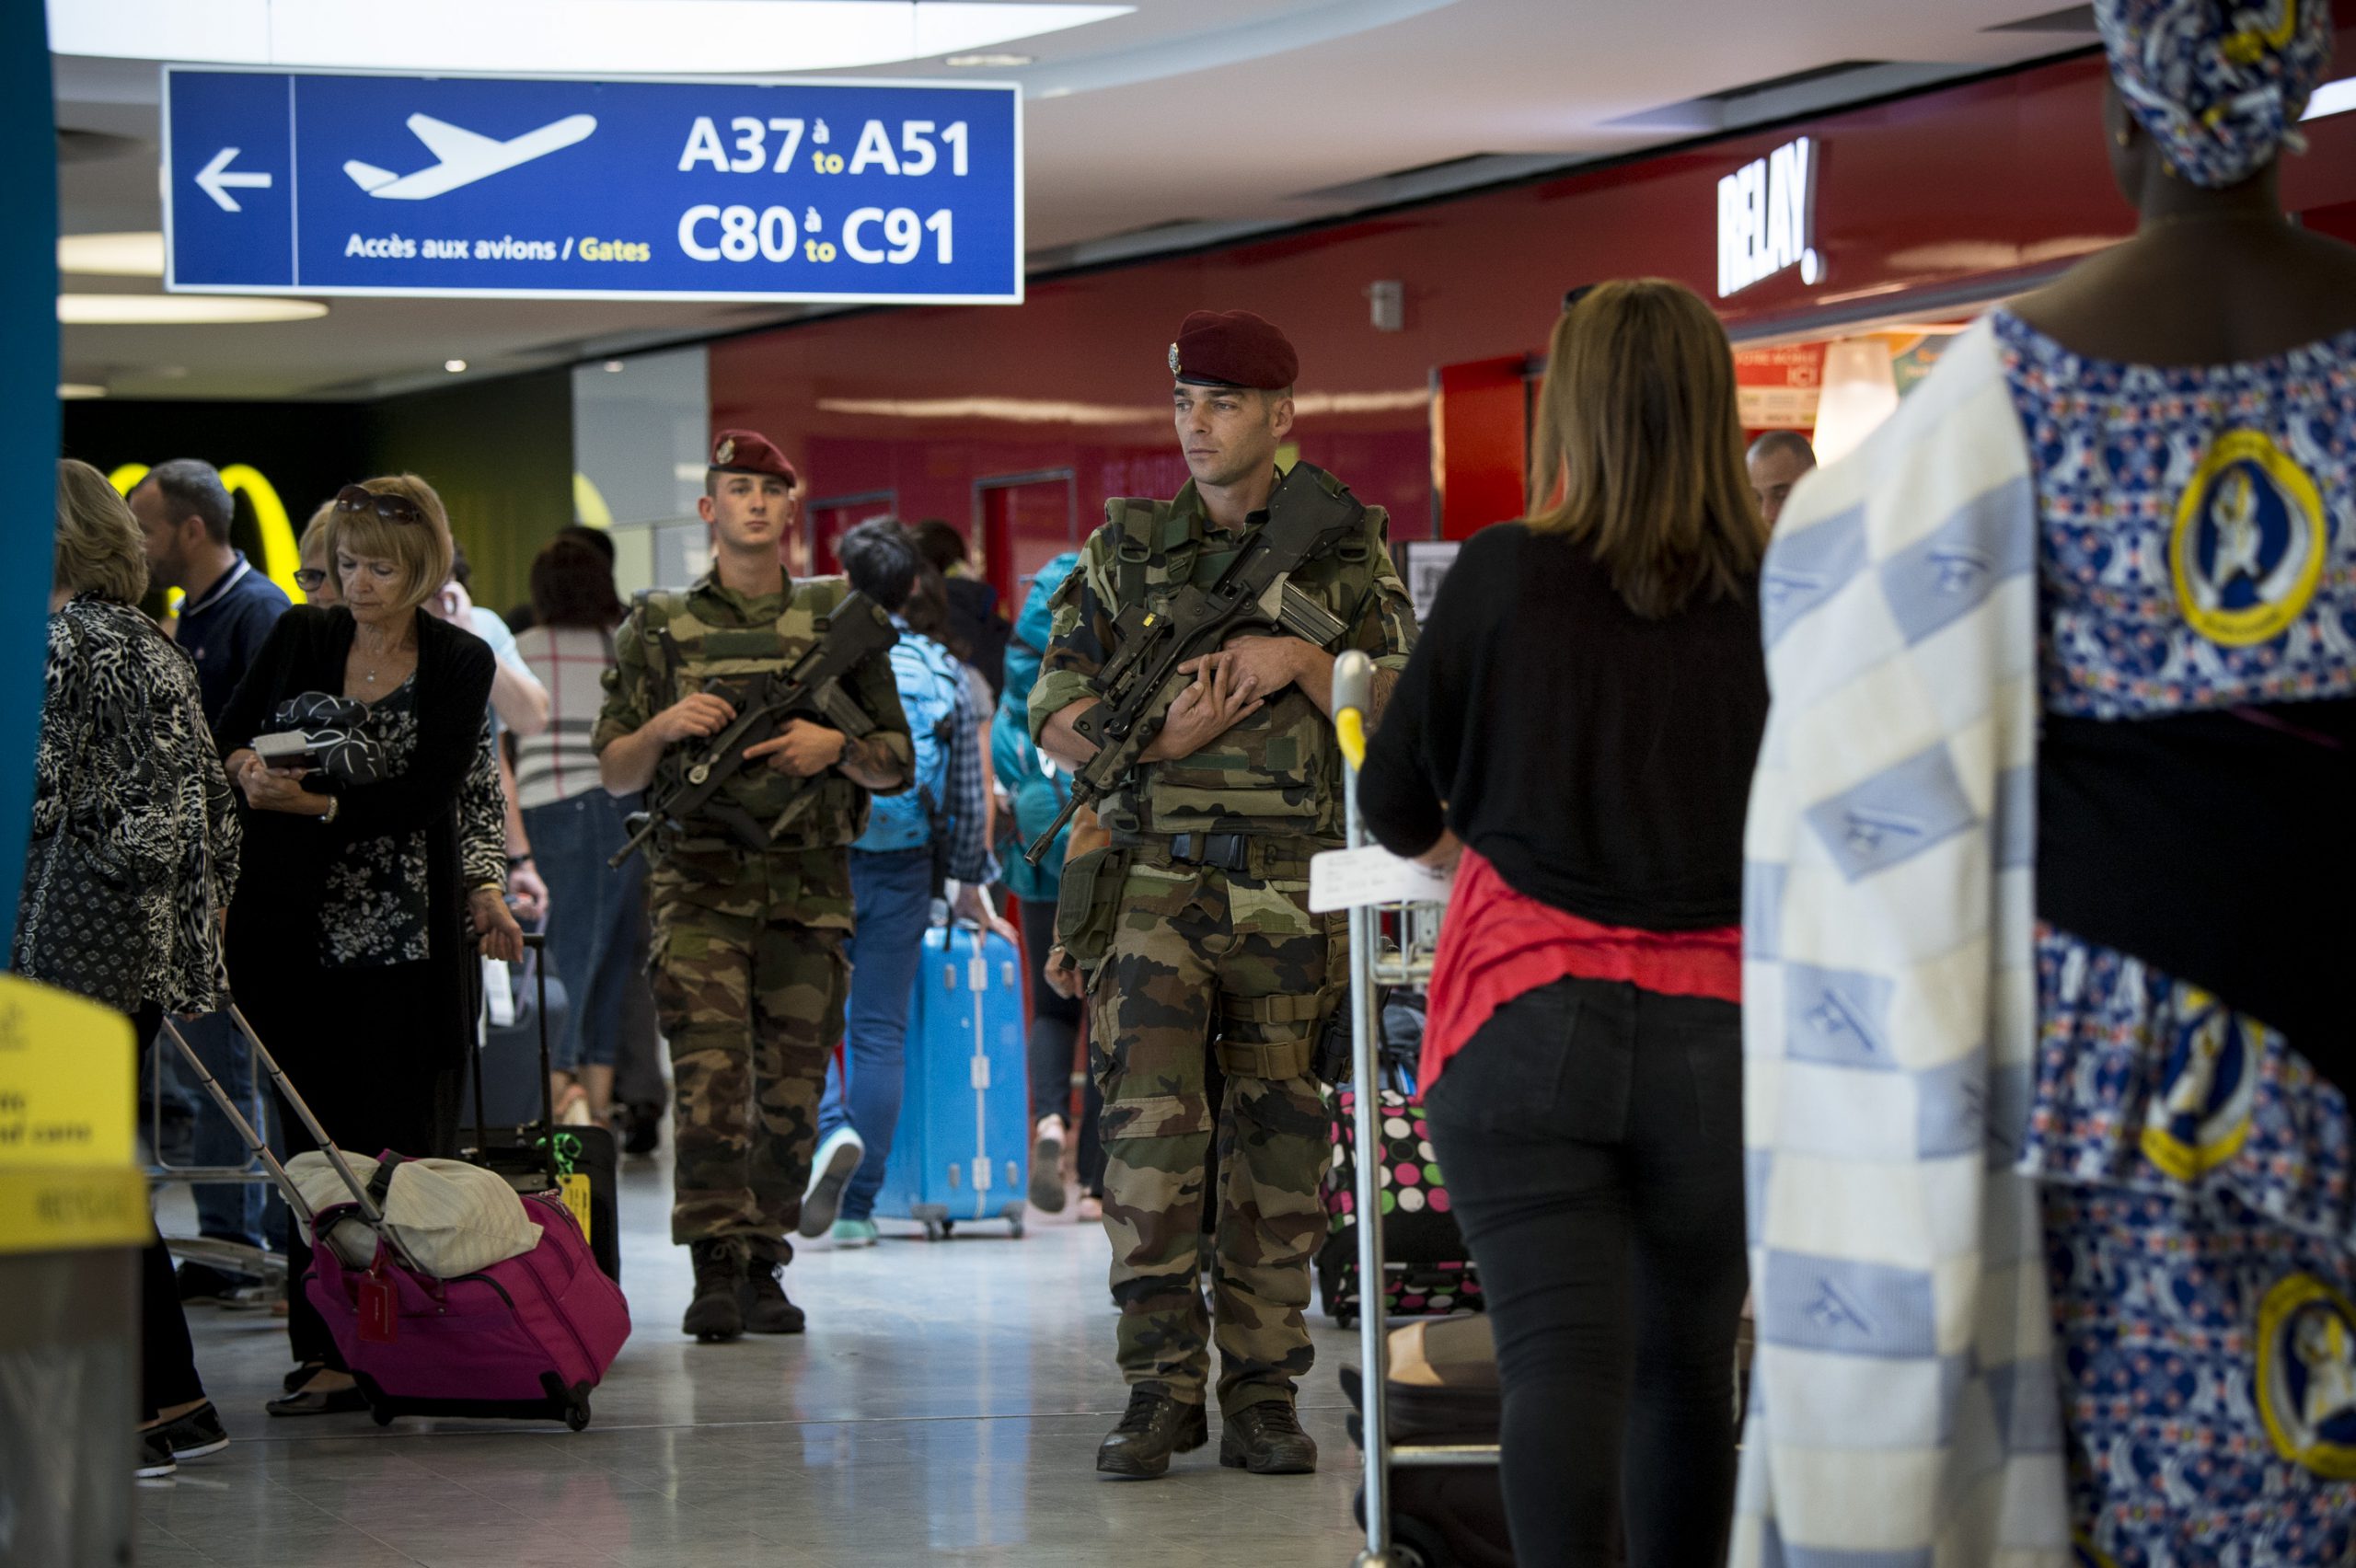 French soldiers provide security at an airport in France as part of Operation Sentinelle. About 13,000 French service members are helping protect France against the threat of extremists. French Ministry of Defense photo. -